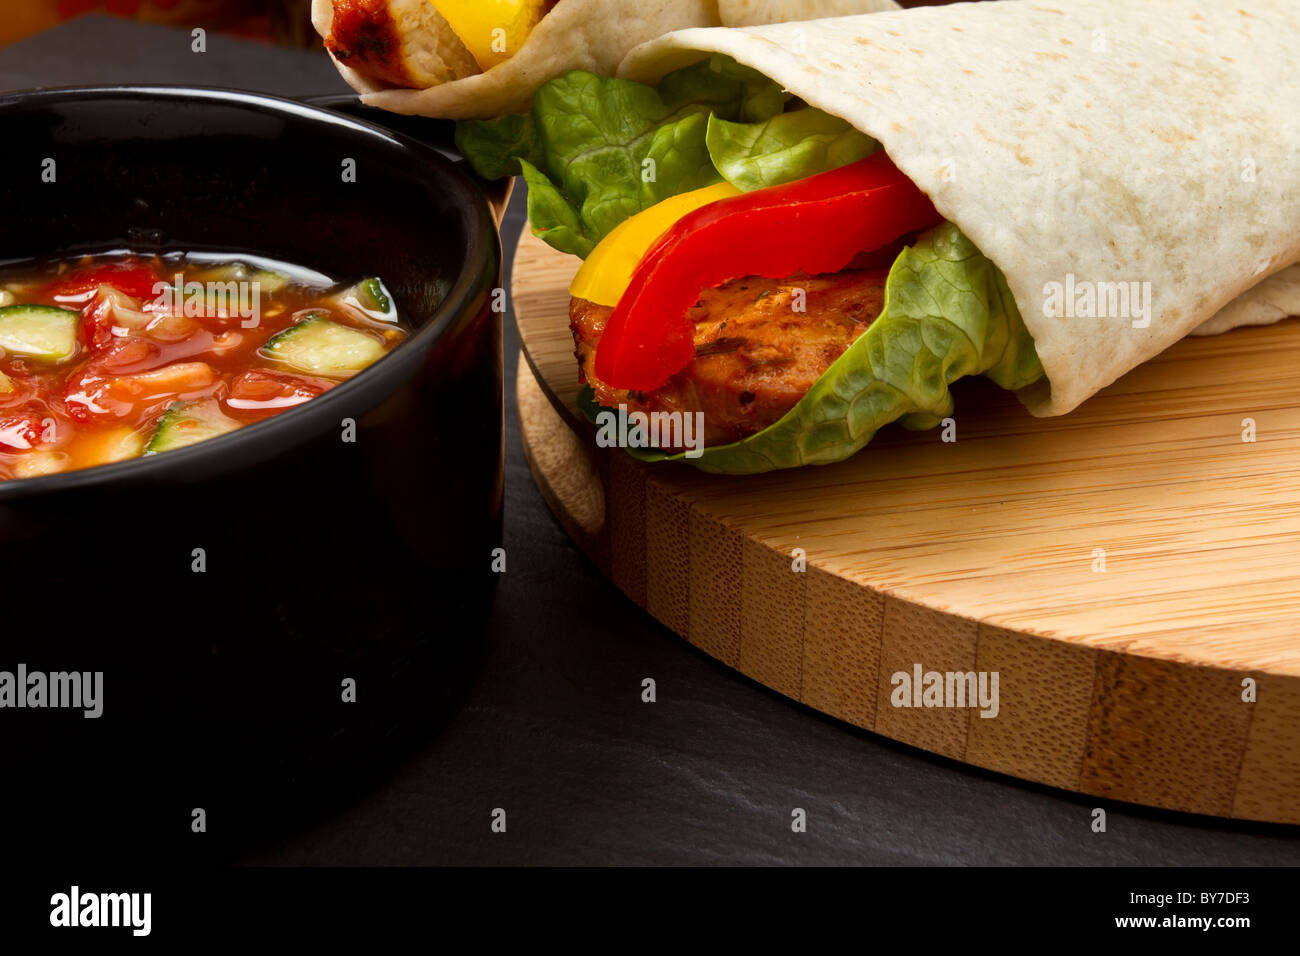 Spicy chicken wrap and pot of vibrant salsa. Stock Photo